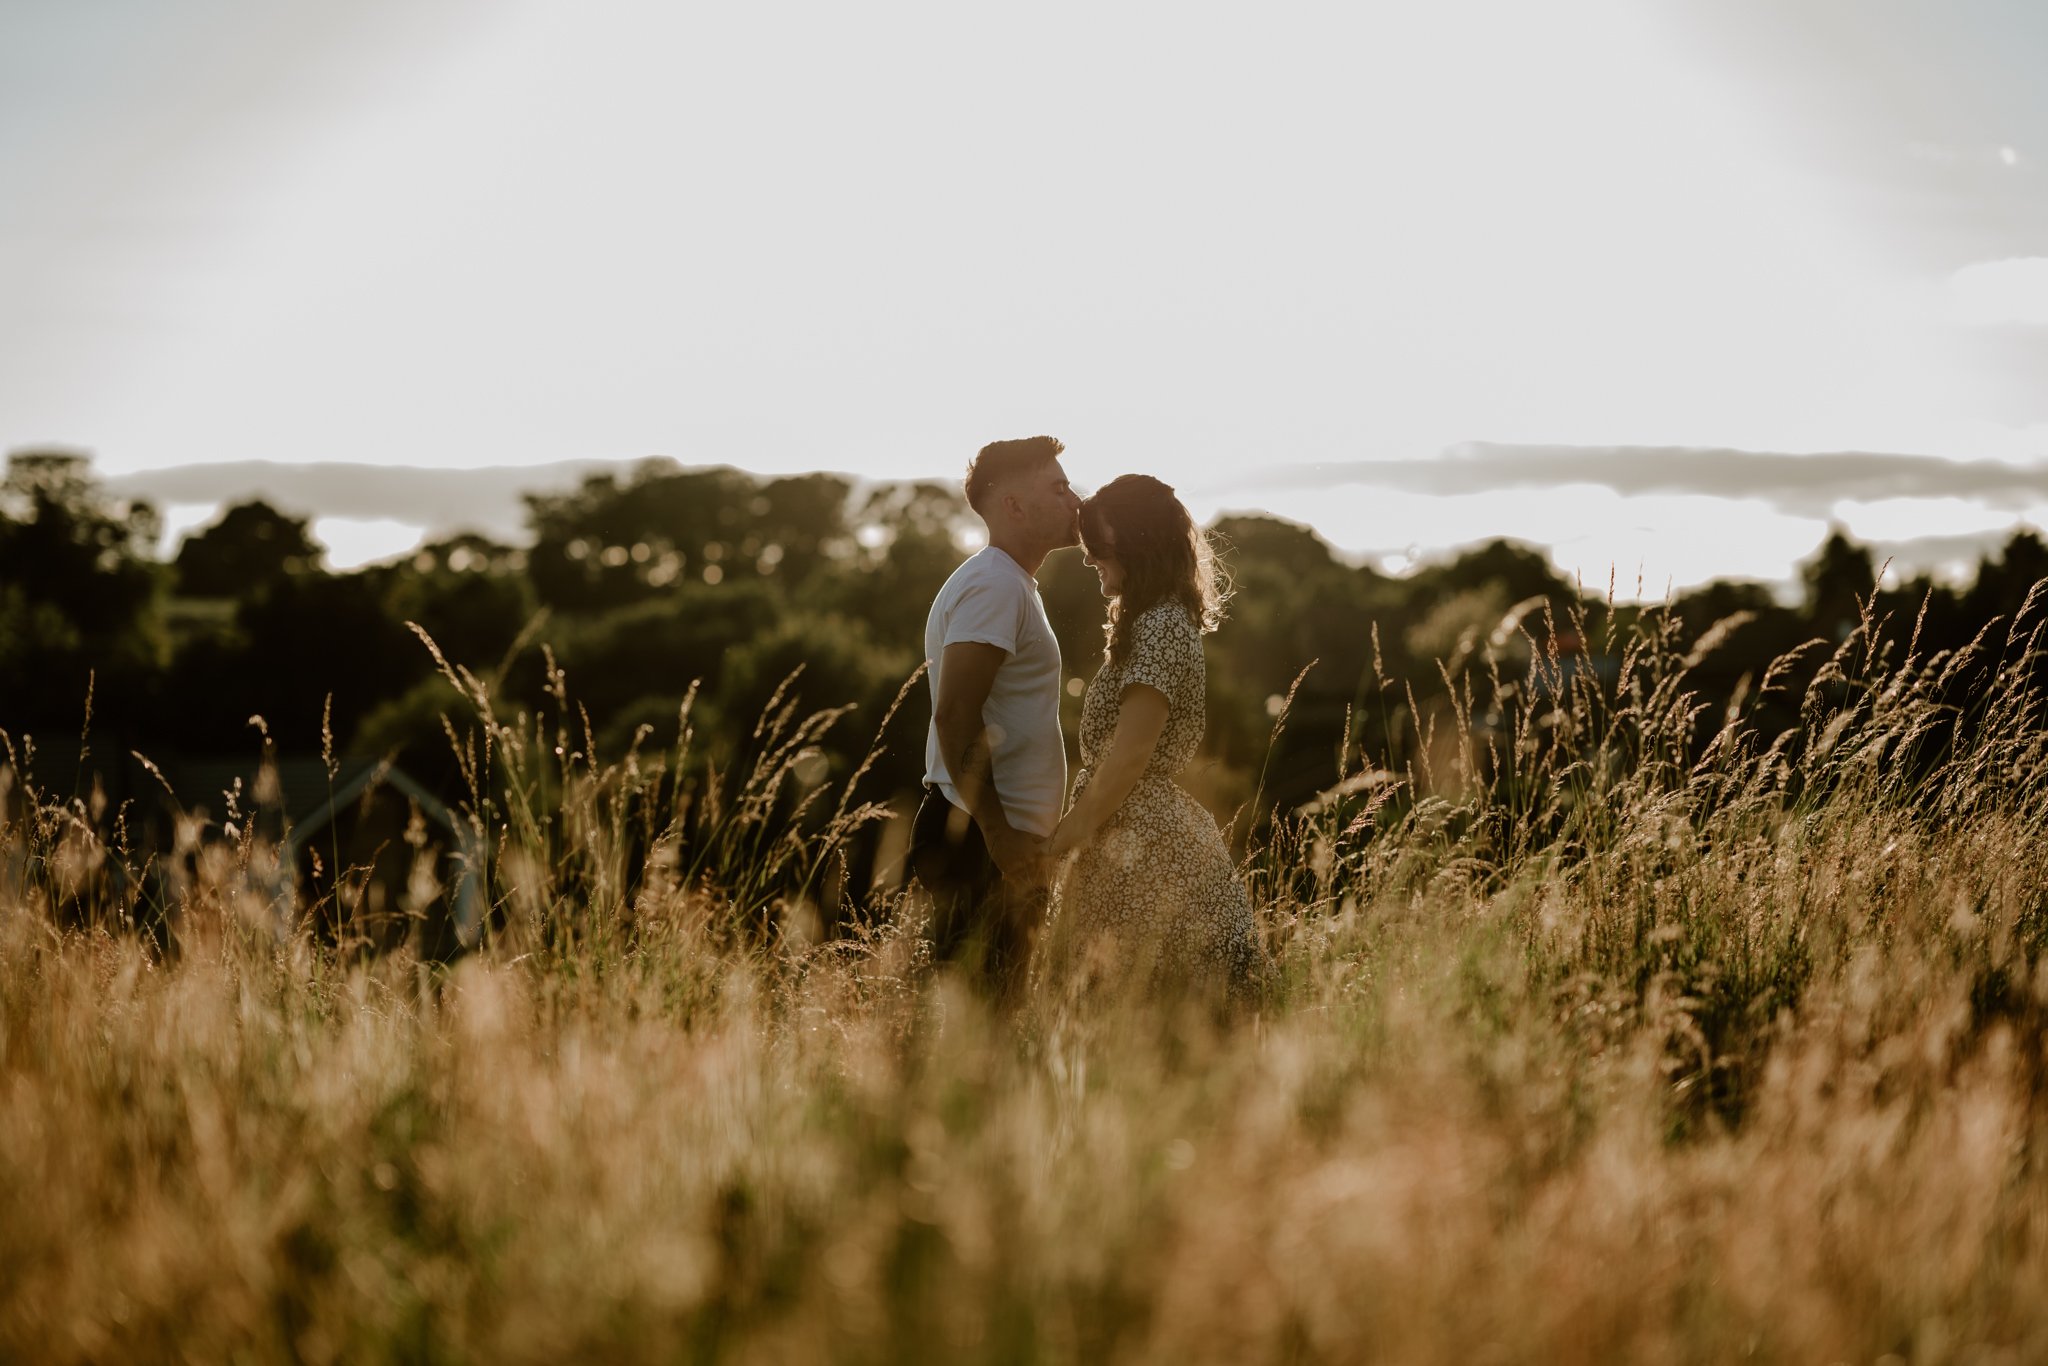 Angus Scotland Engagement and Wedding Photographer - Emily and Gabriel - Adventure Couple Session23.jpg